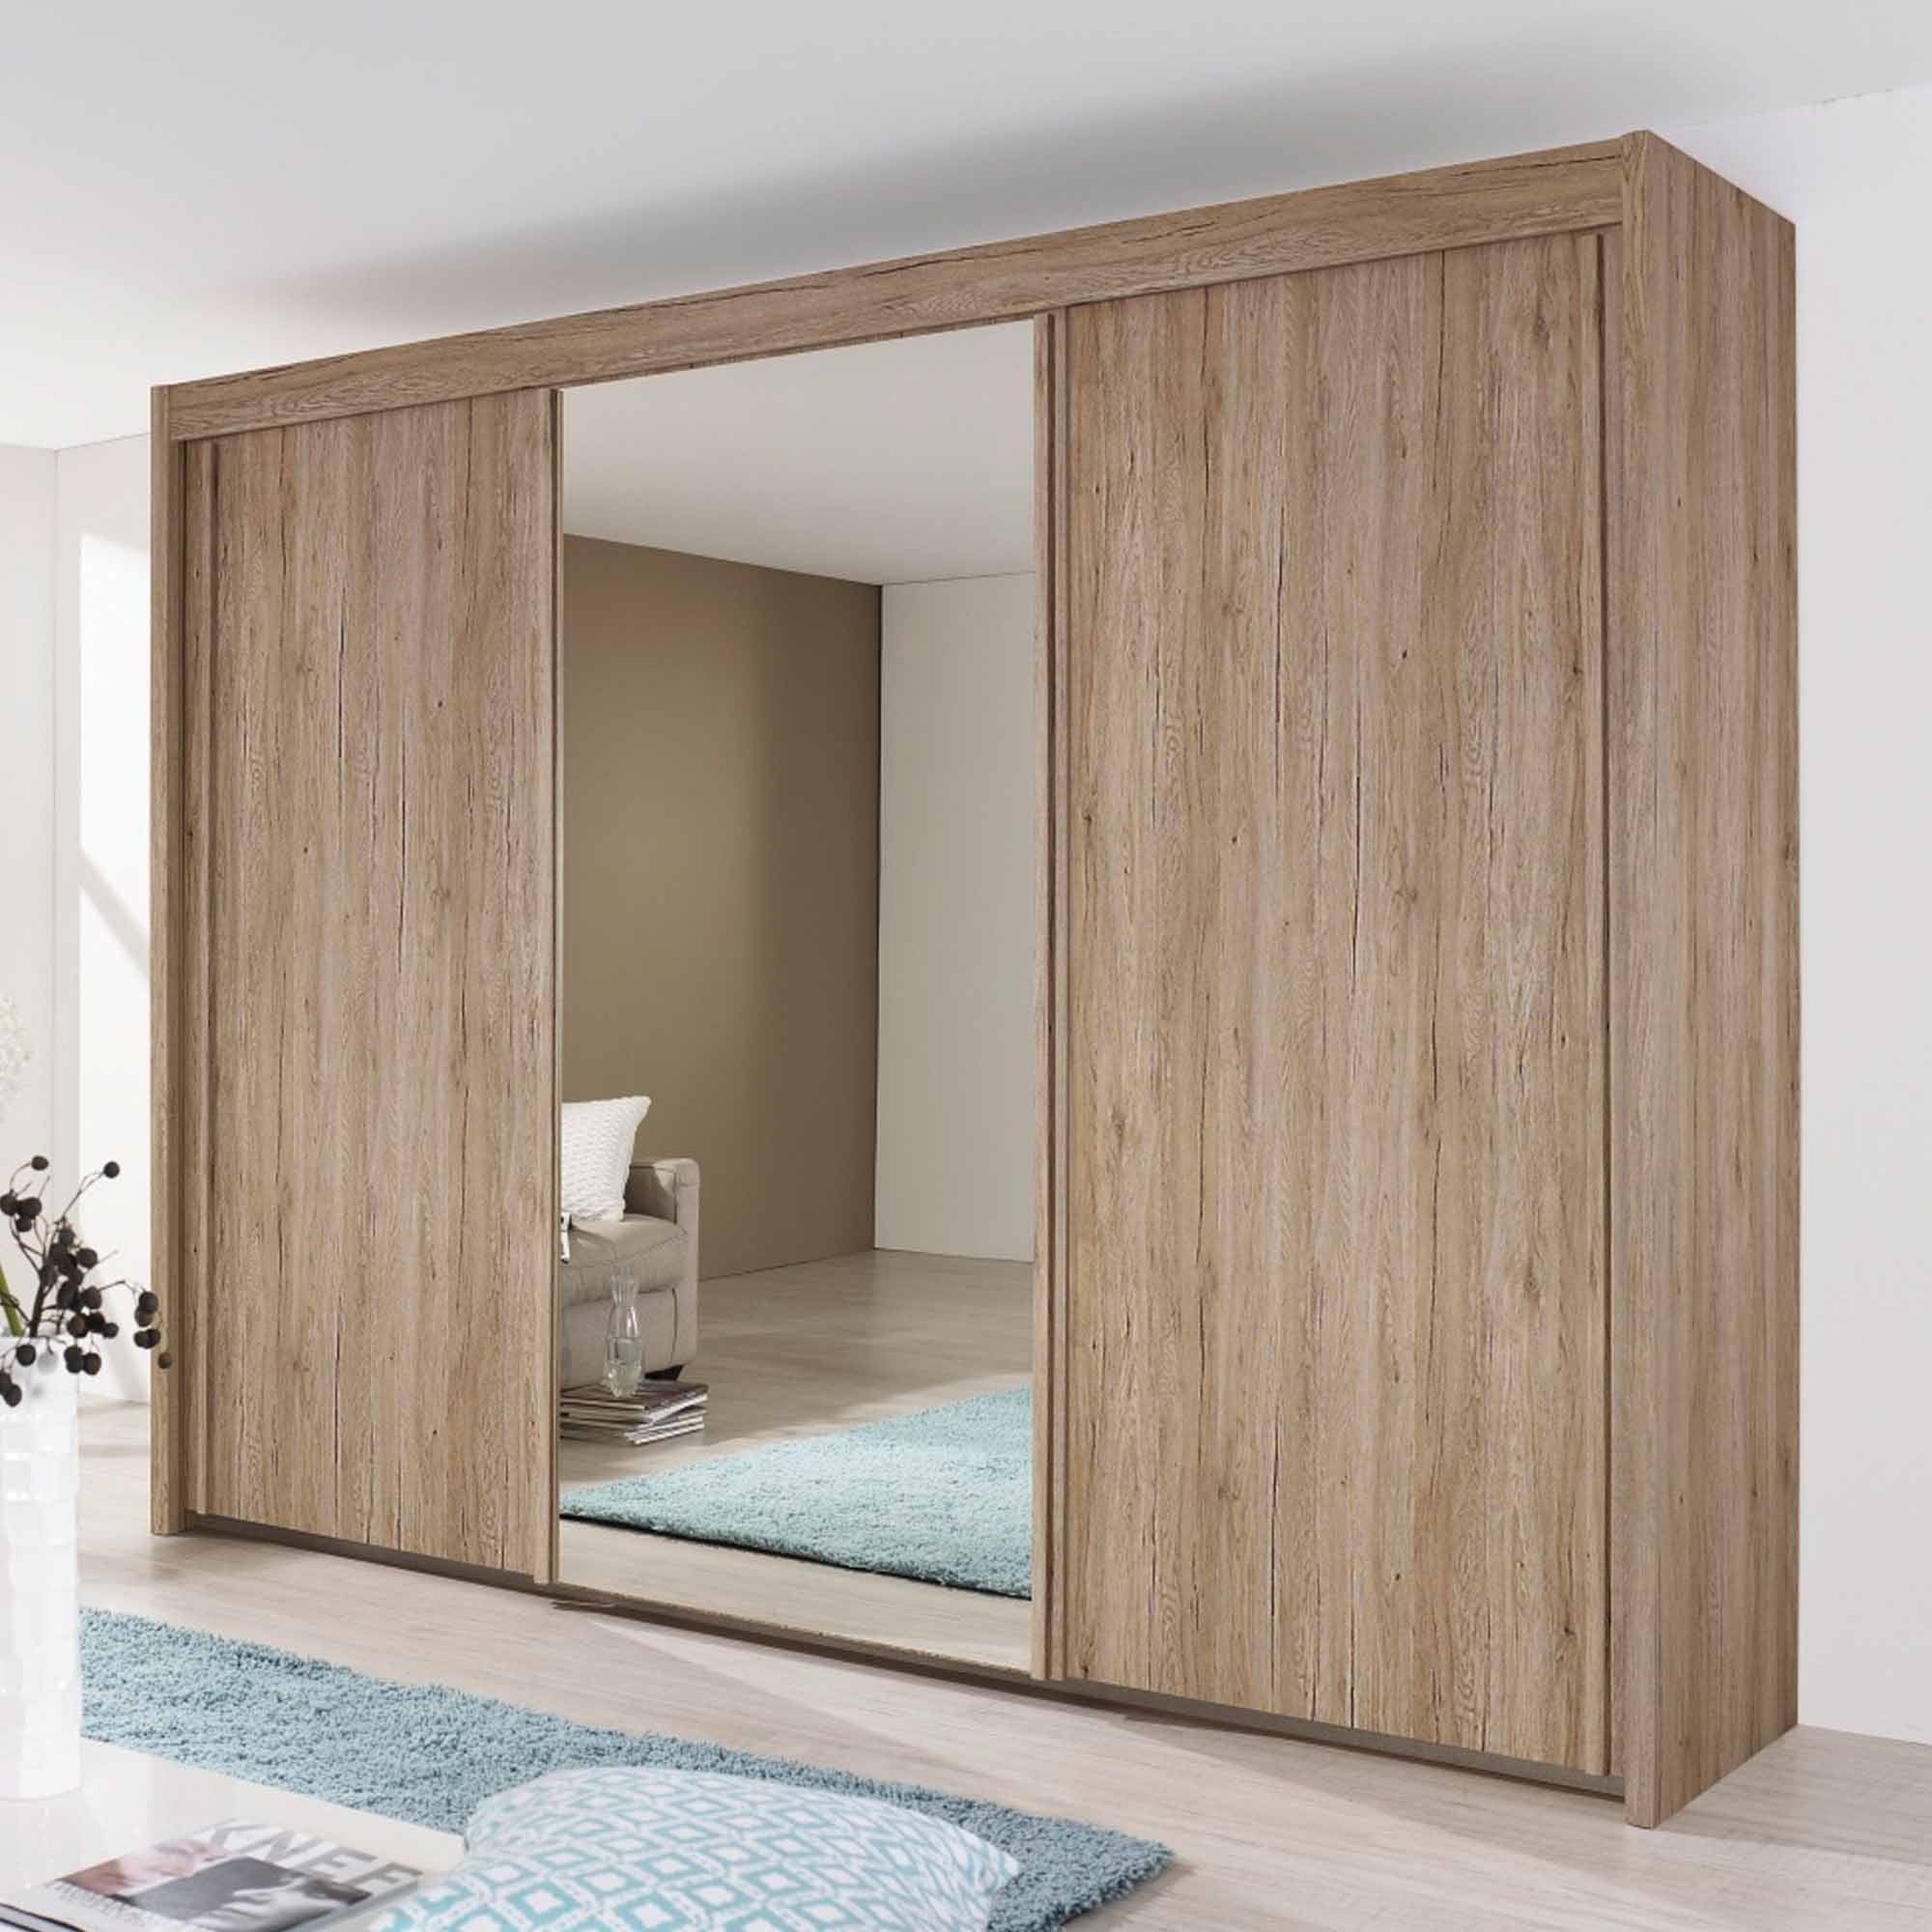 Rauch Imperial Sliding Wardrobe Within Imperial Wardrobes (View 4 of 15)